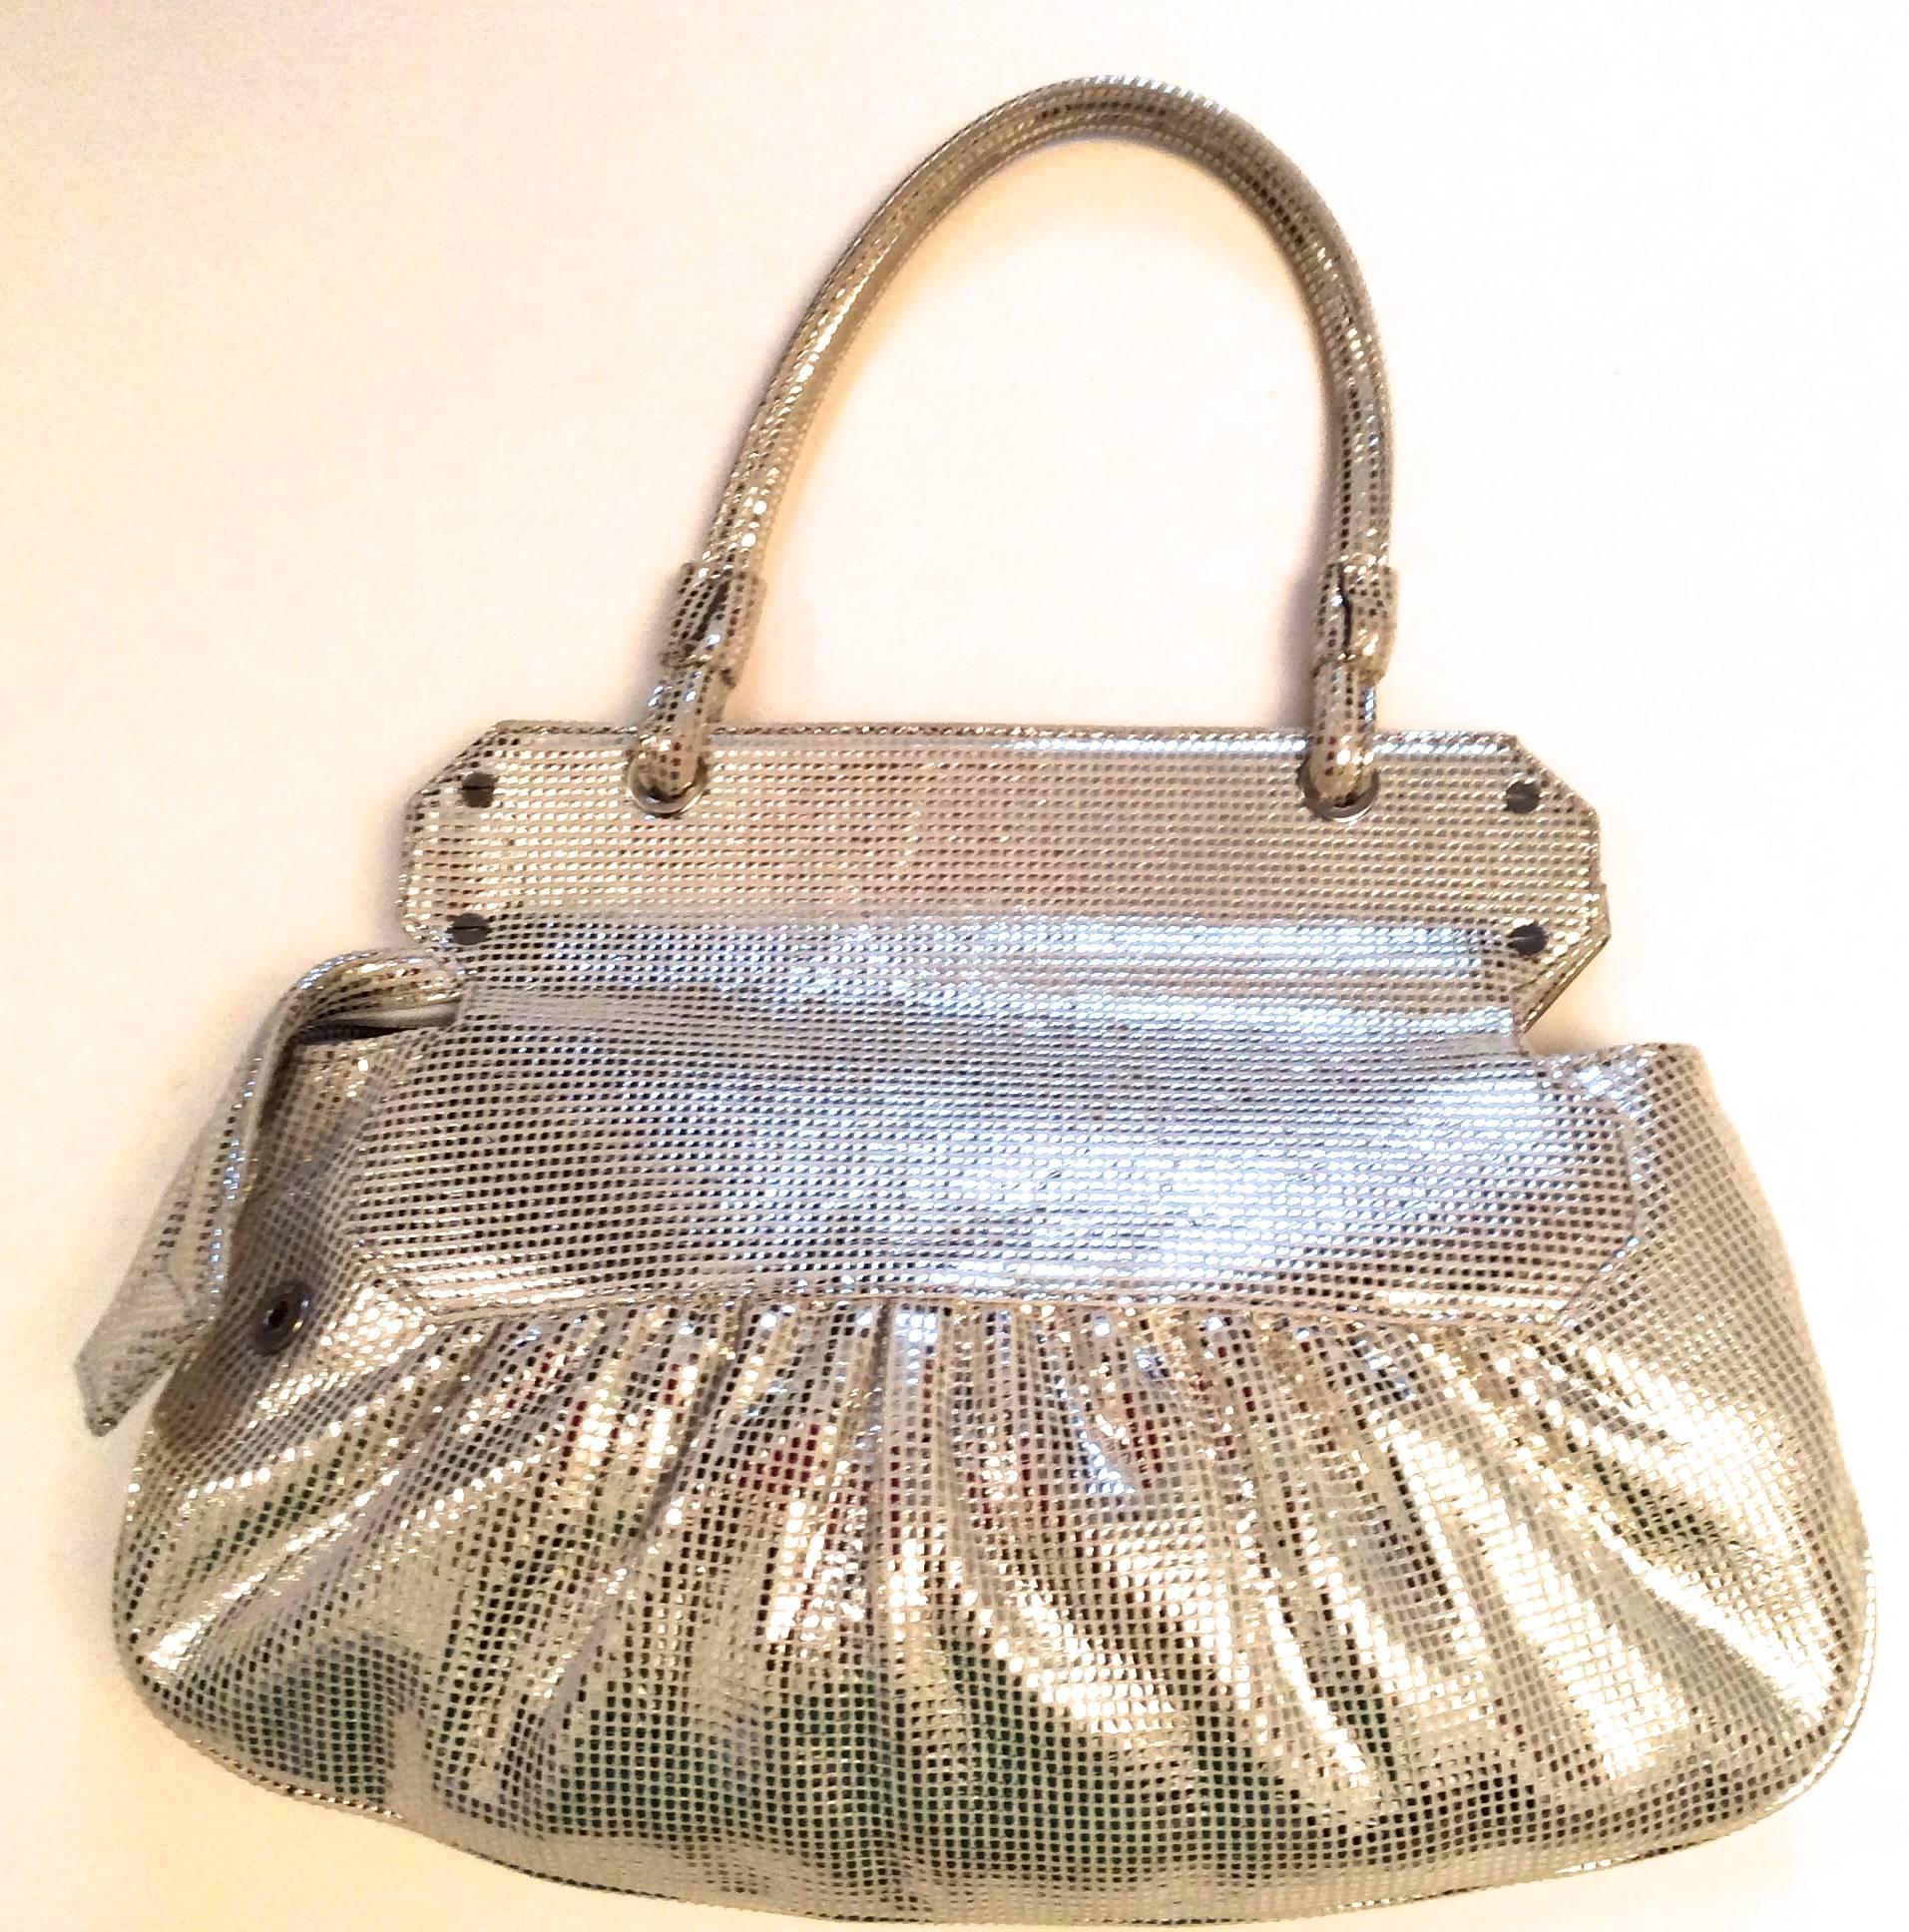 Women's Beautiful New Fendi Bag - Fabulous Metallic - Leather and Suede For Sale